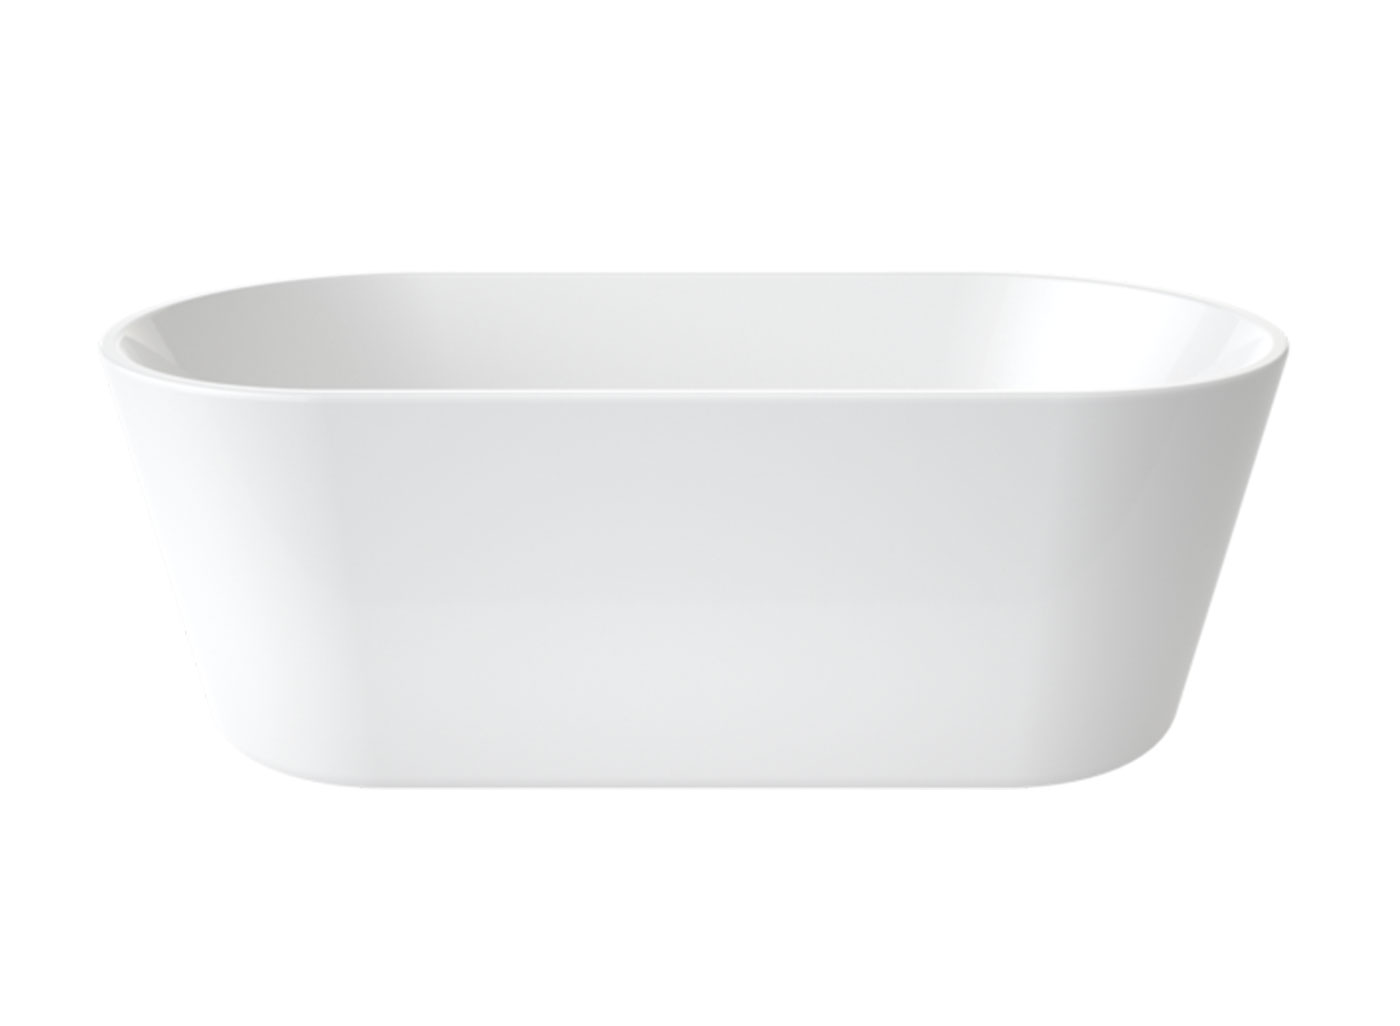 Nothing says luxury like a freestanding bath. This beautiful oval design will make your bath experience just that much more special. A seamless design with minimalist styling